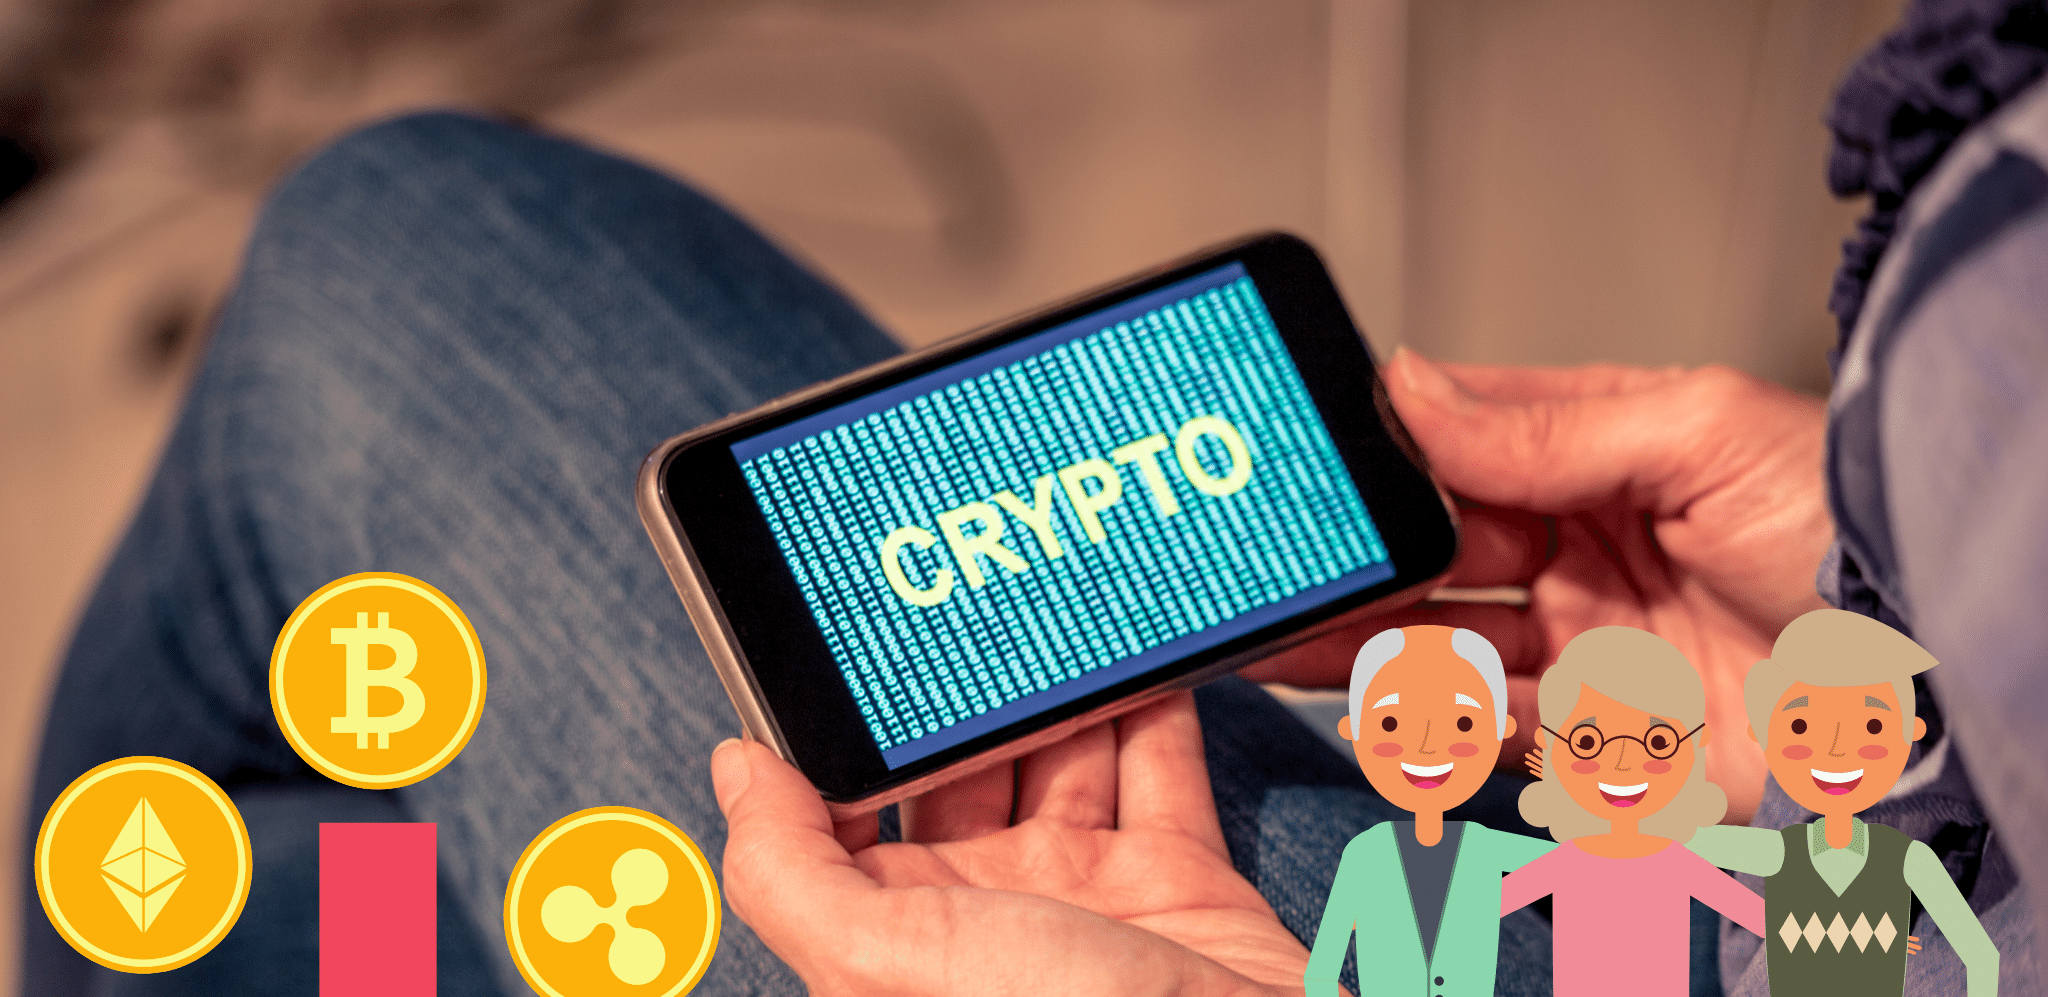 Build Wealth In Your 50s by investing in Cryptocurrency